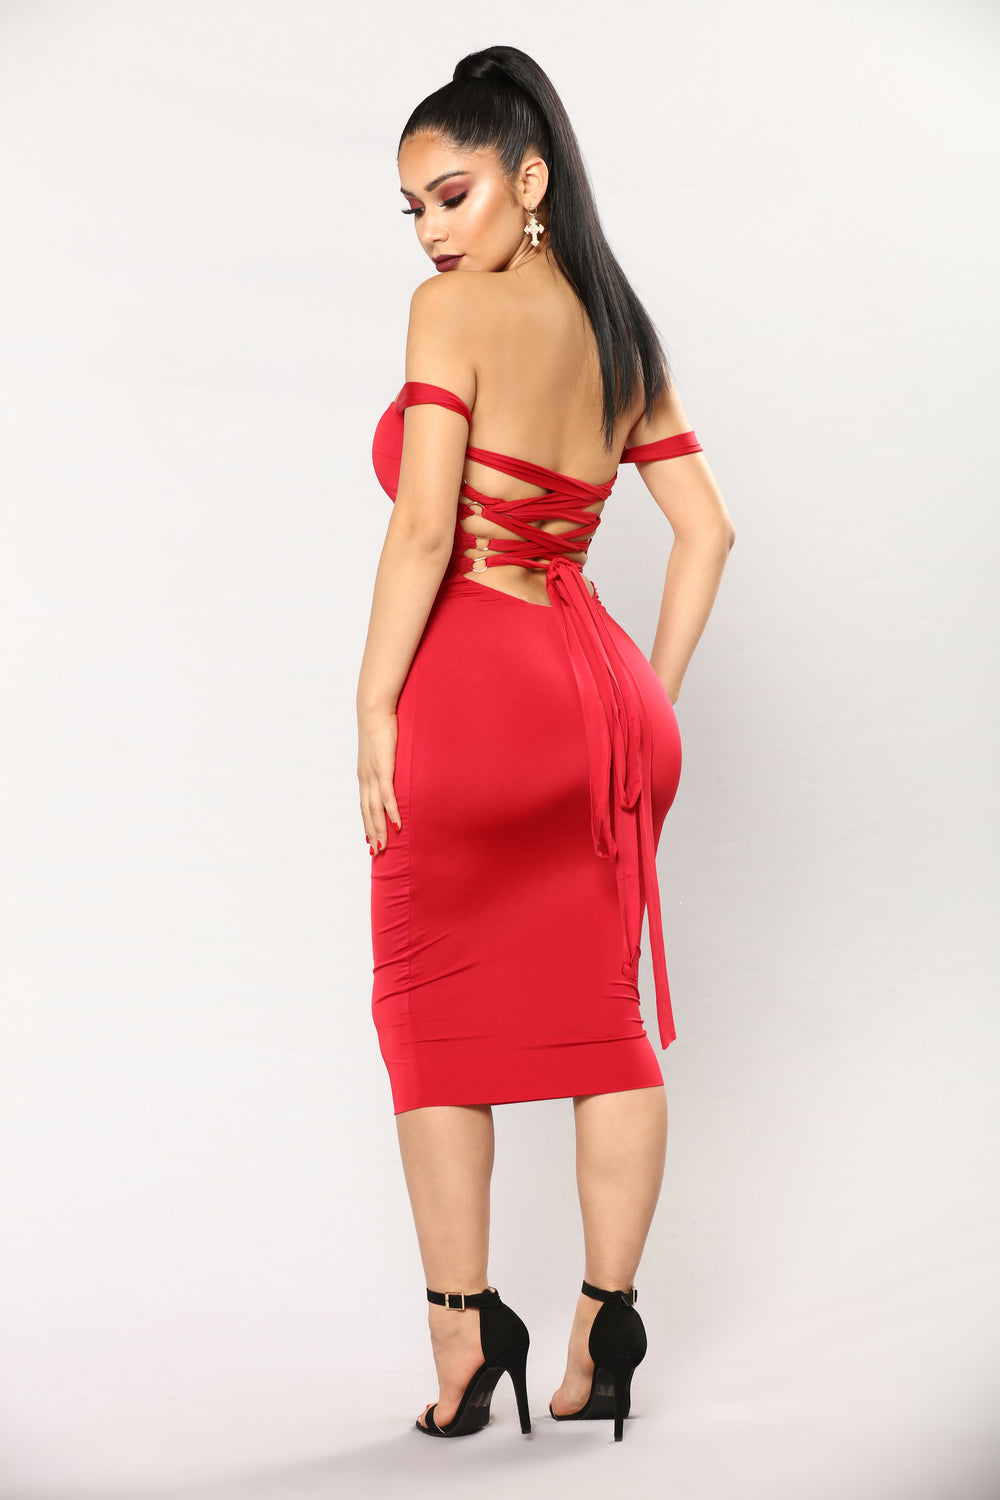 Framed Lace Up Dress - Red